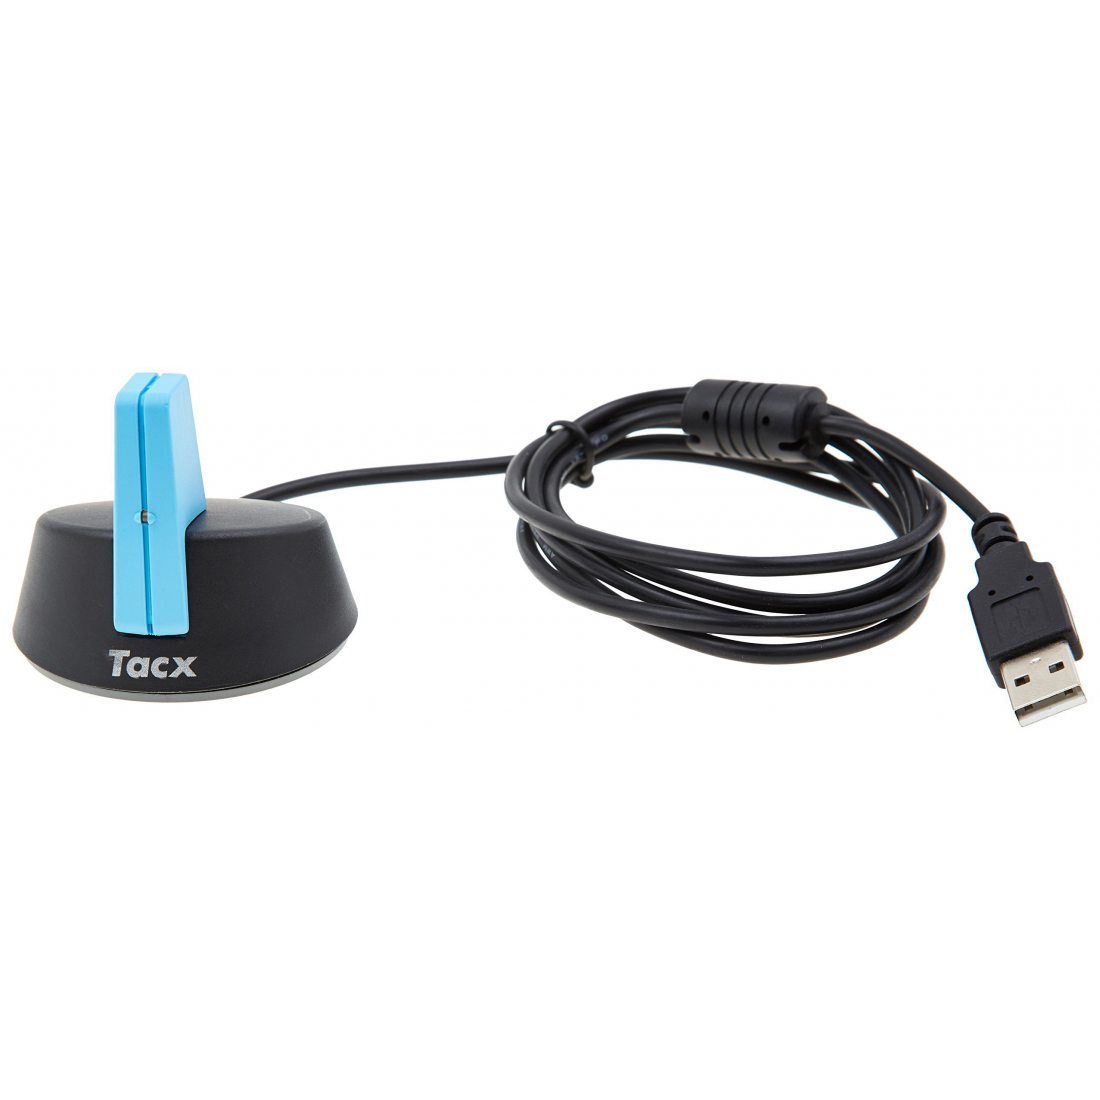 Tacx T2028 USB Ant + antenne